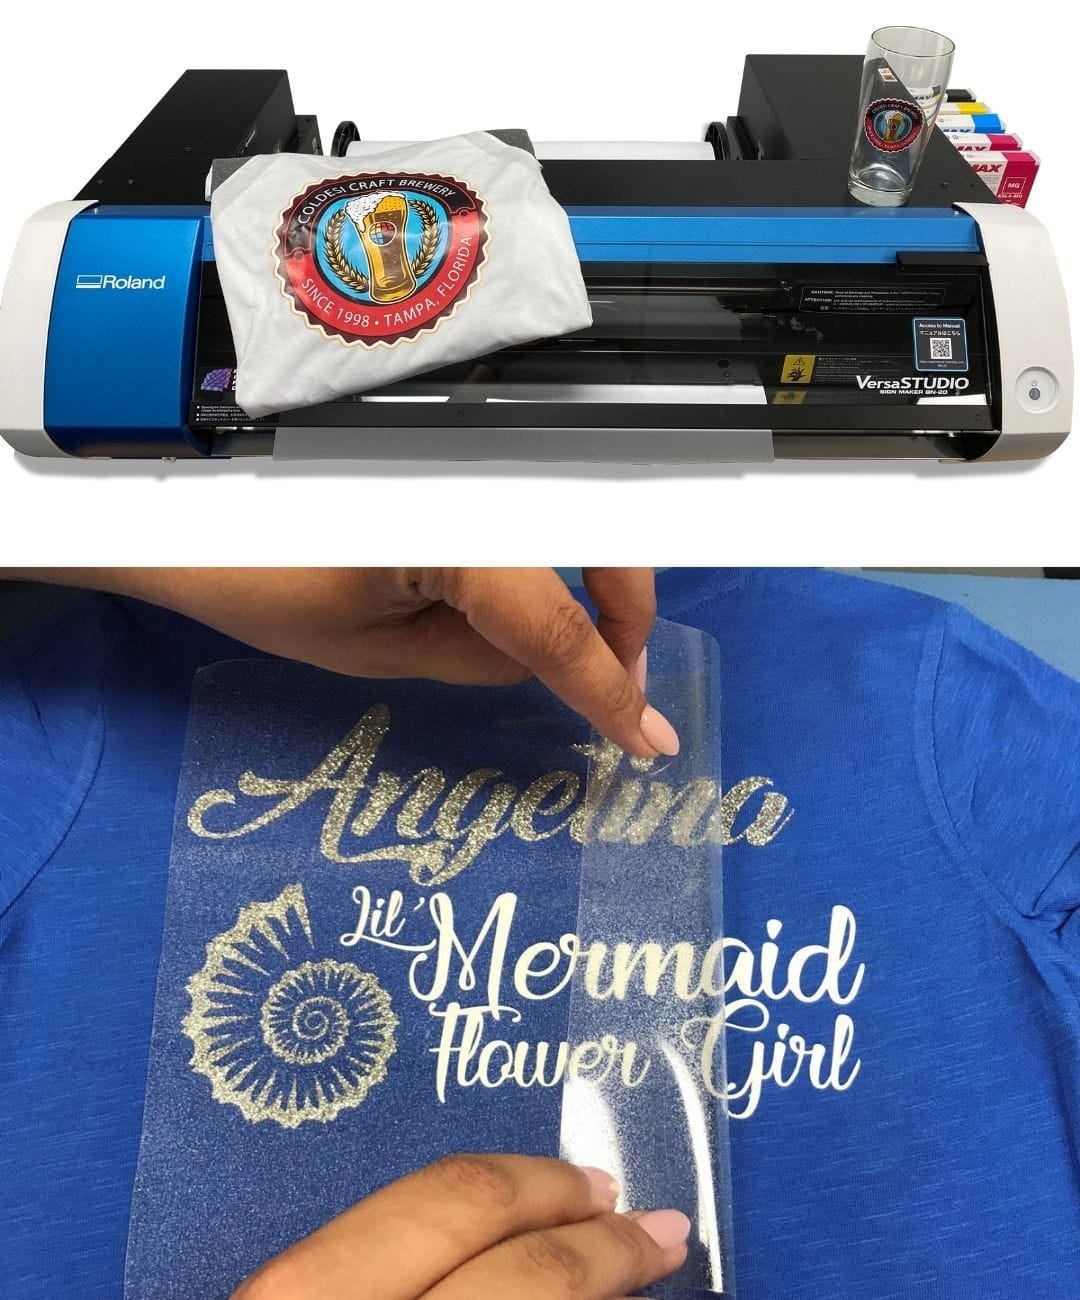 The 15 Best T Shirt Printing Machine: Reviews and Buying Guide For